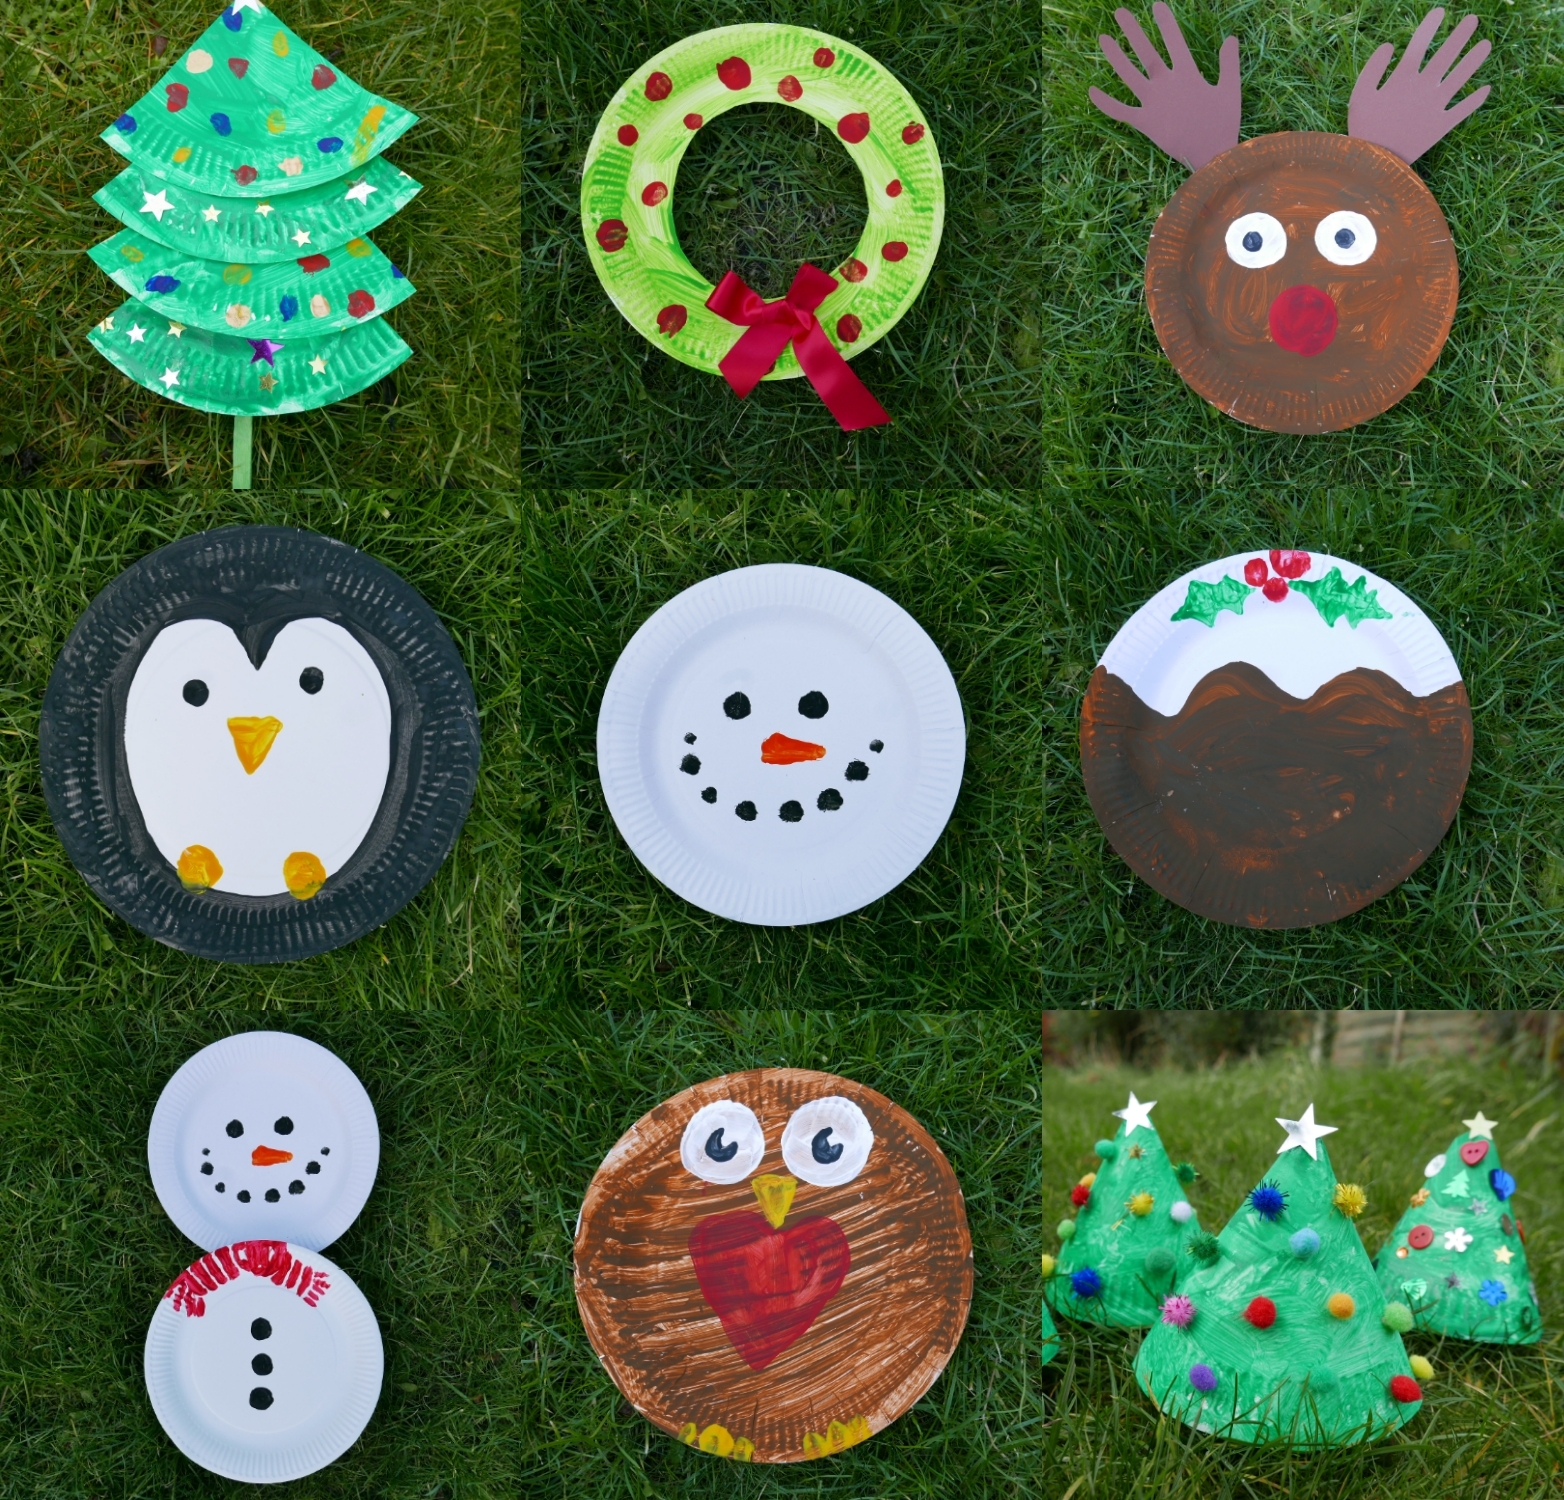 8 Christmas paper plate craft ideas – Childsplayabc ~ Nature is our  playground